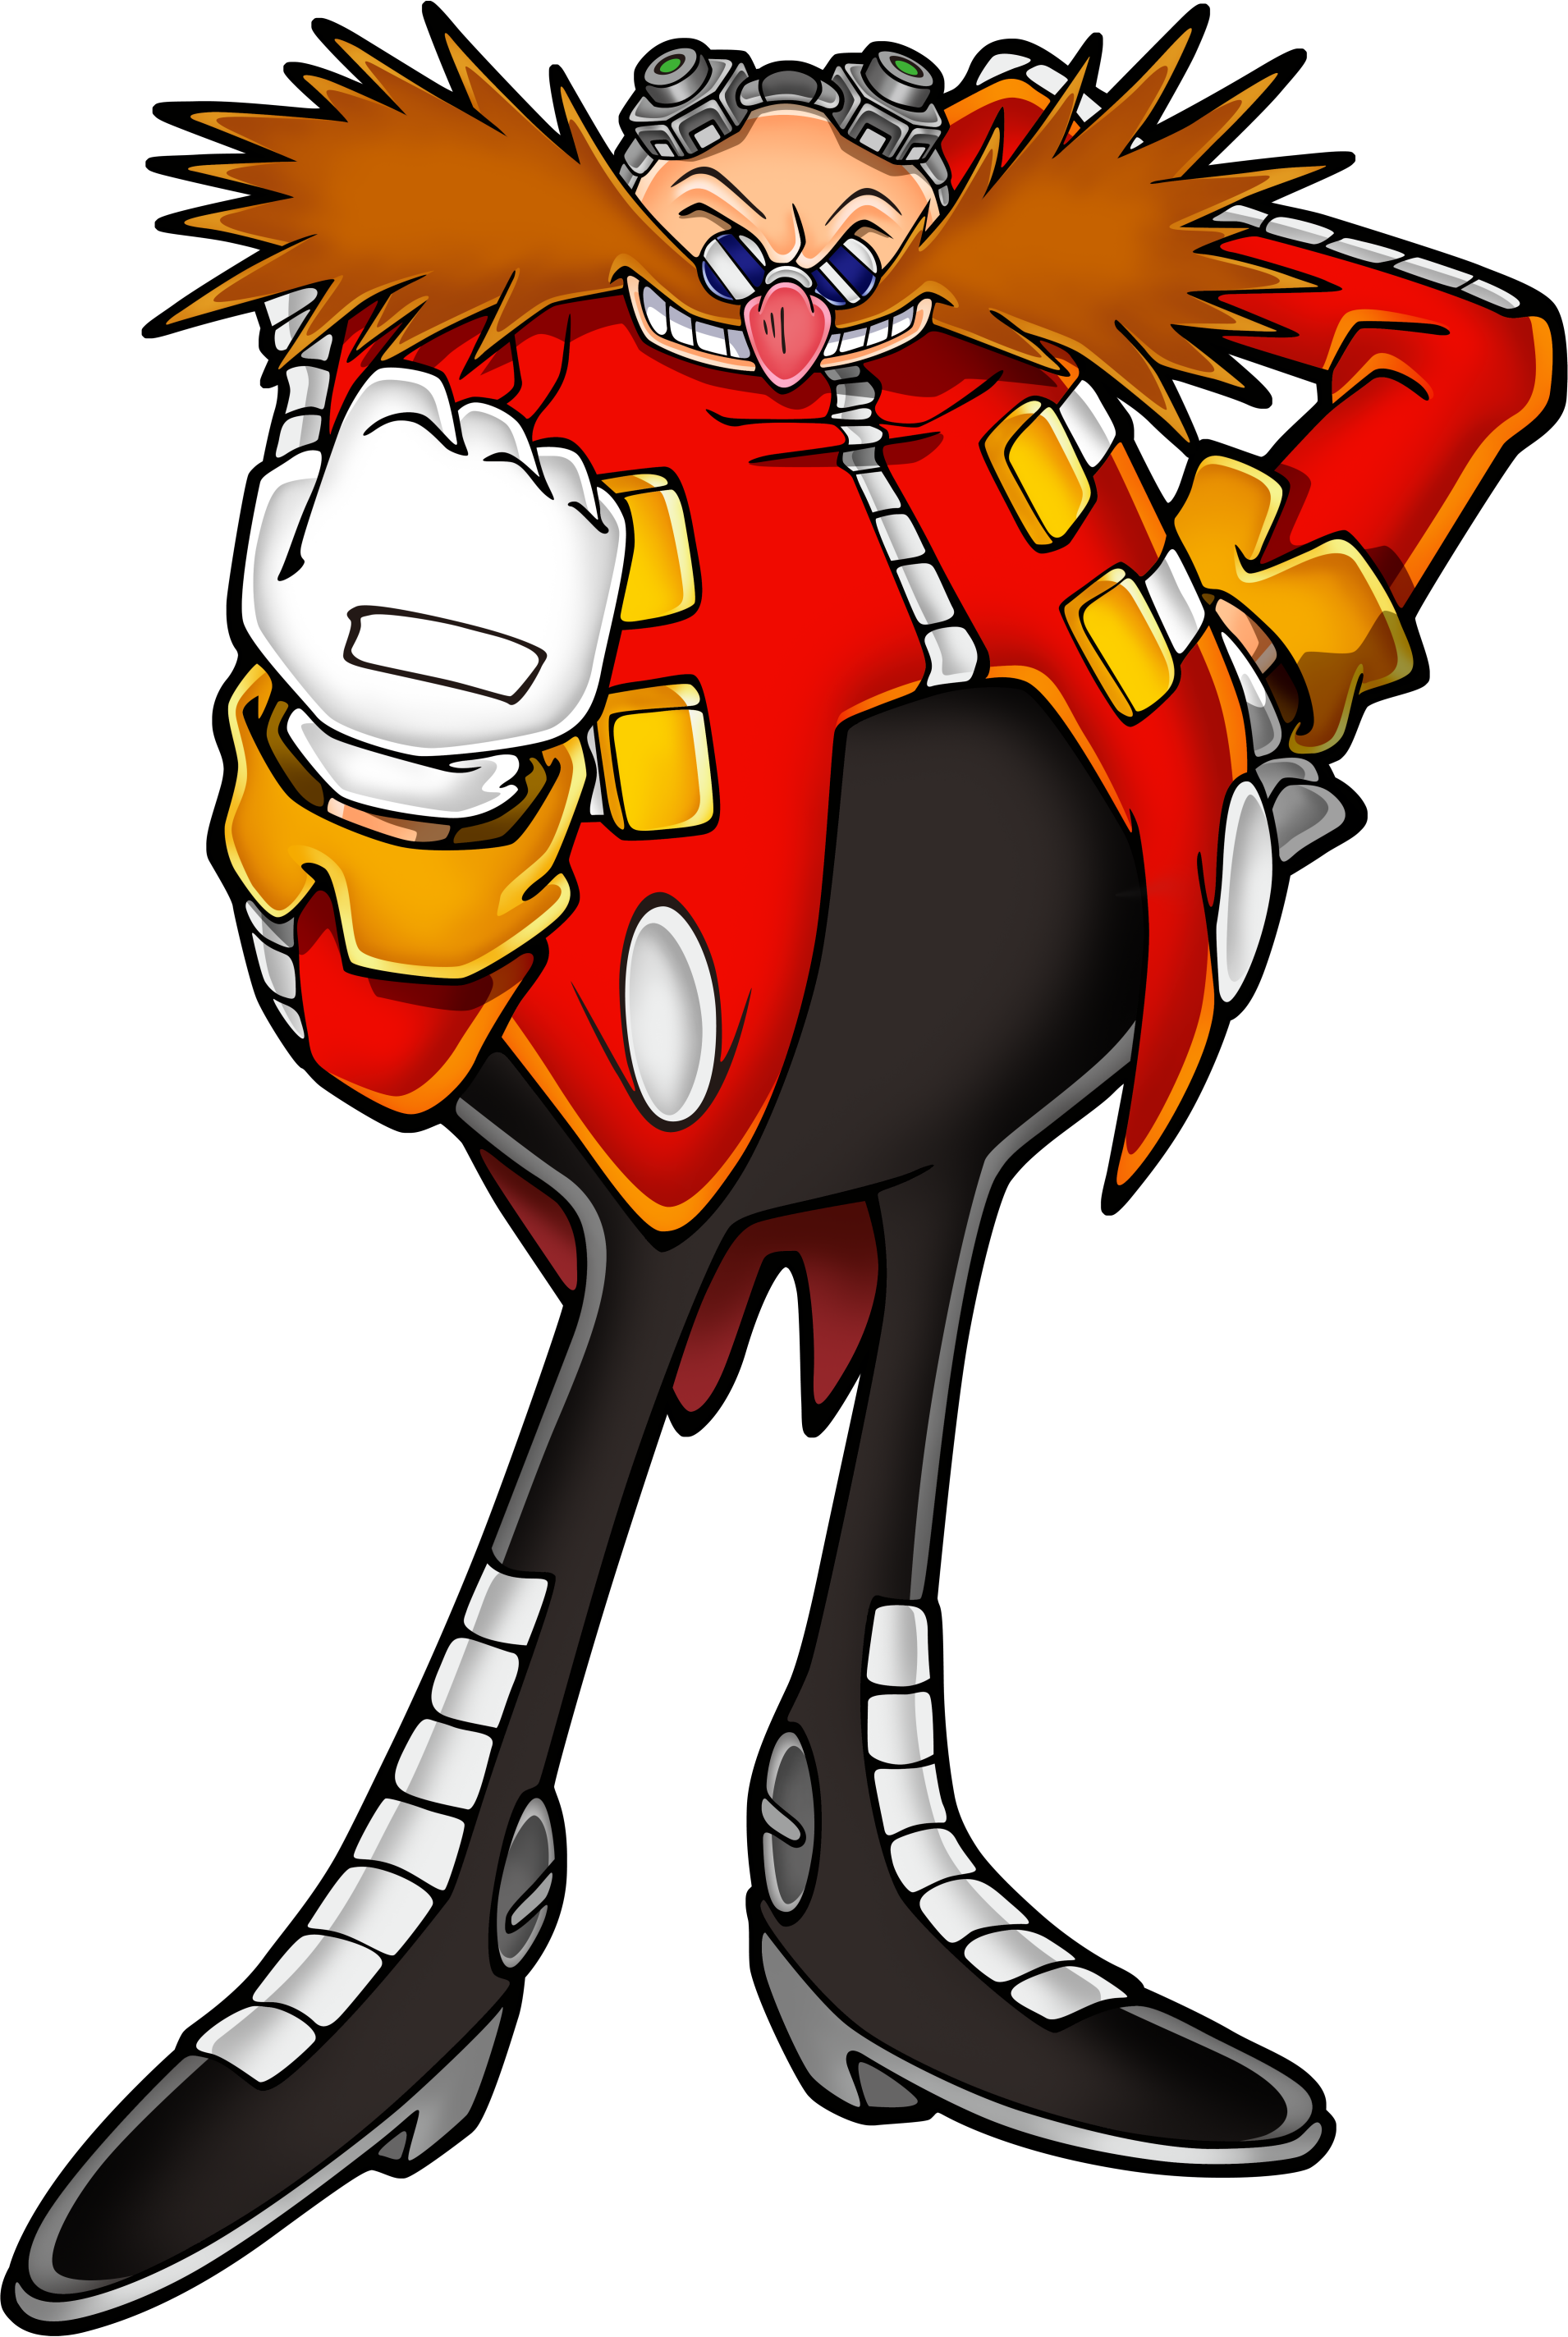 Starved eggman *Design* but with different colors : r